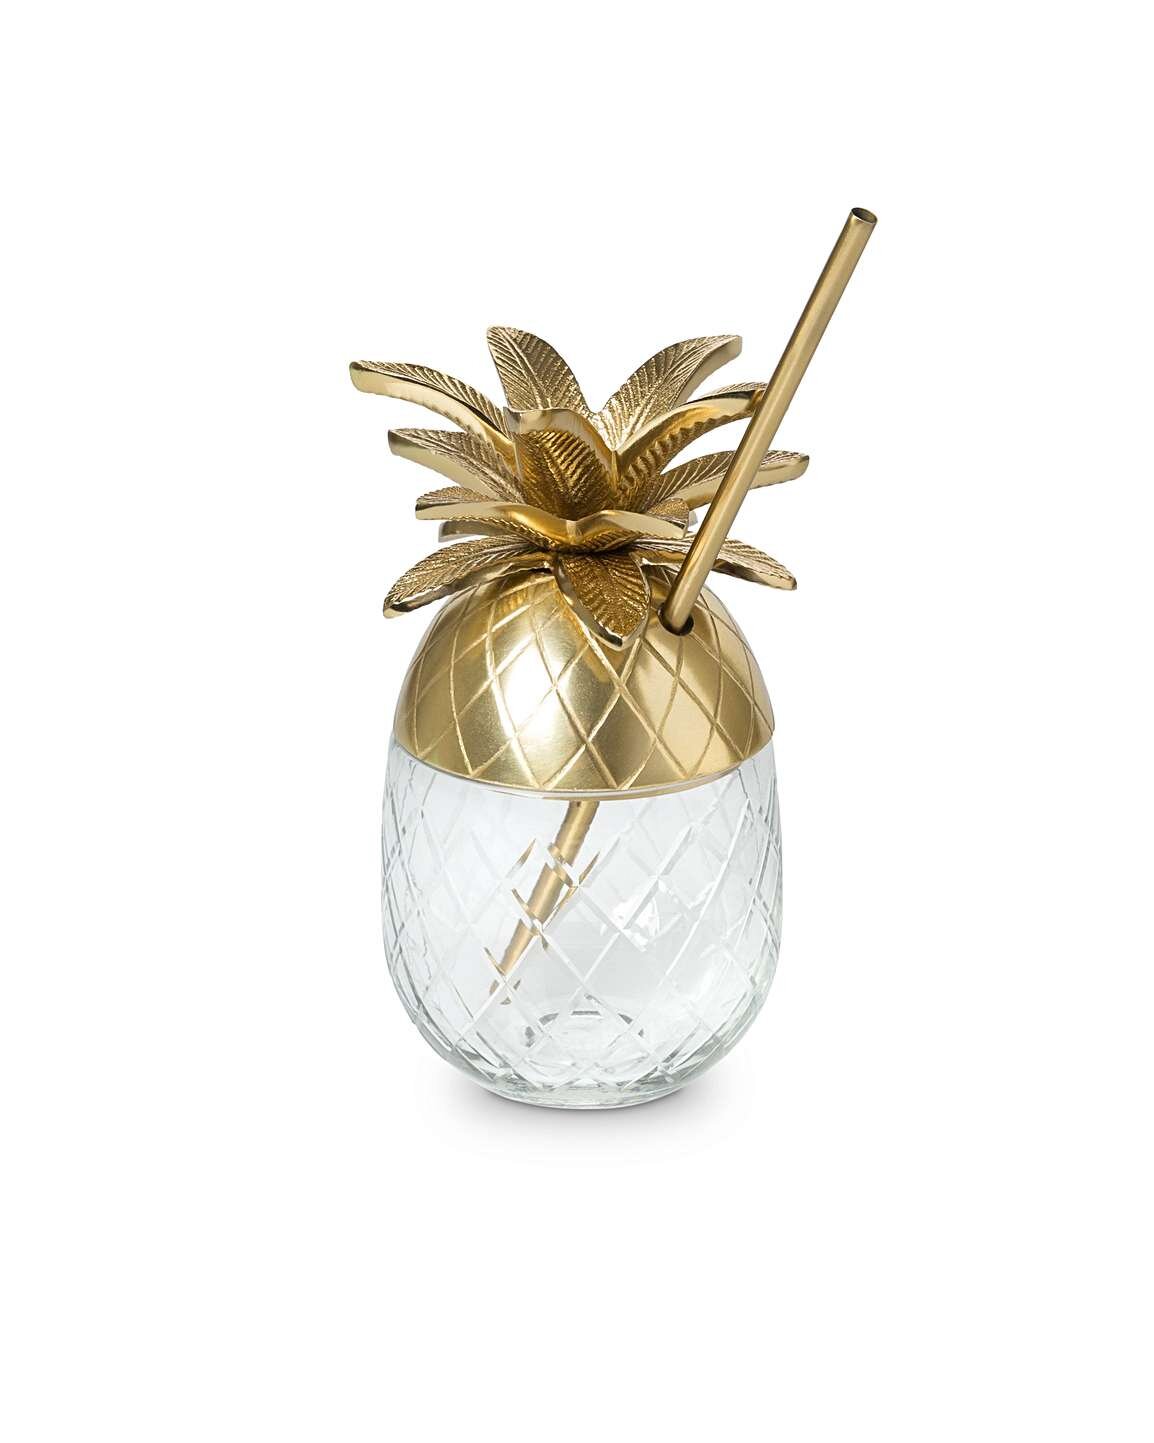 1141252_oliver-bonas_homeware_pineapple-gold-and-glass-cocktail-cup.jpg